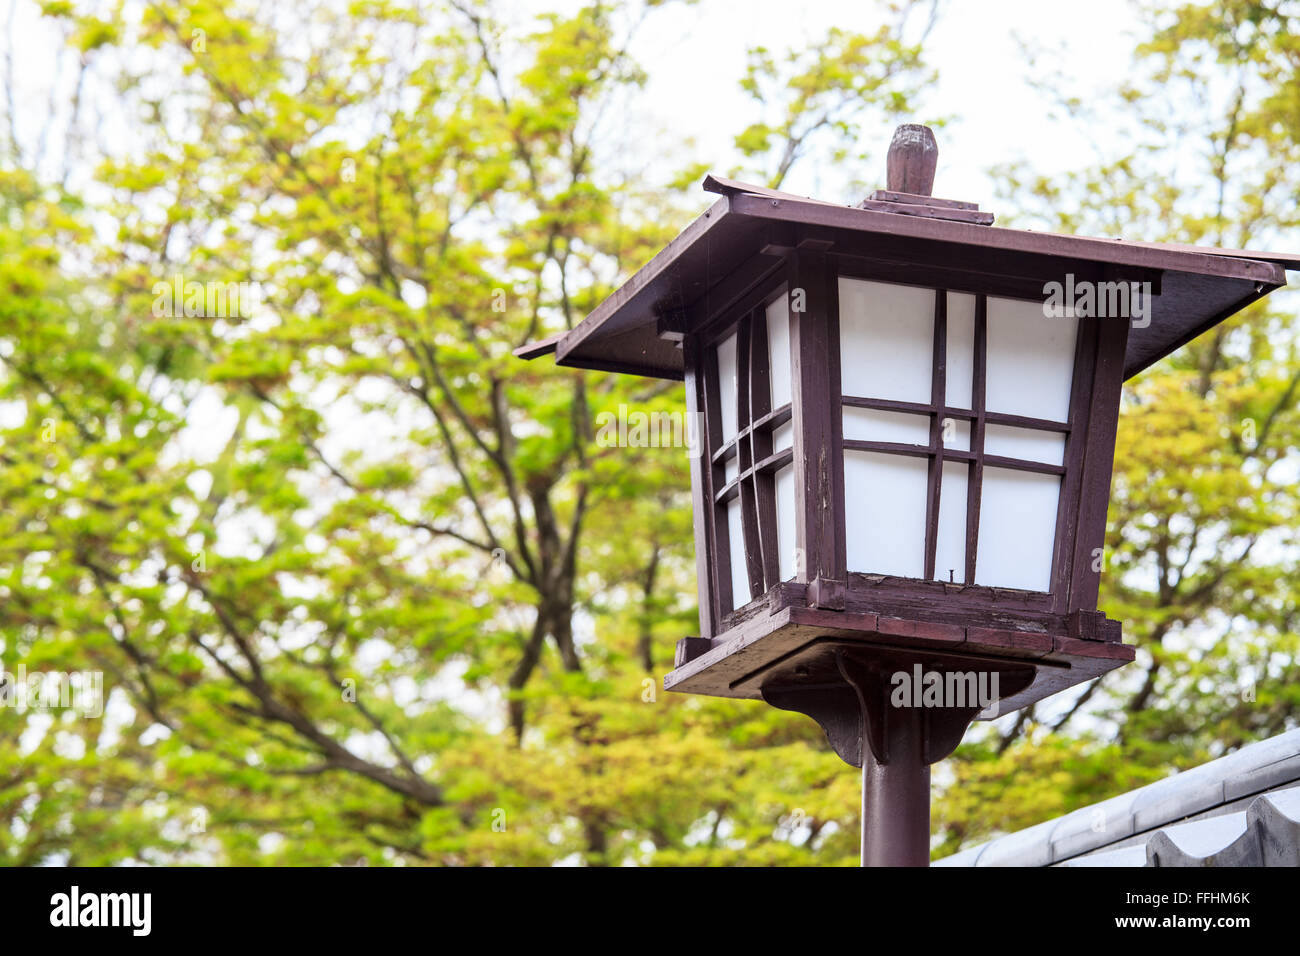 The Lamp in temple ,Japan with white background Stock Photo - Alamy